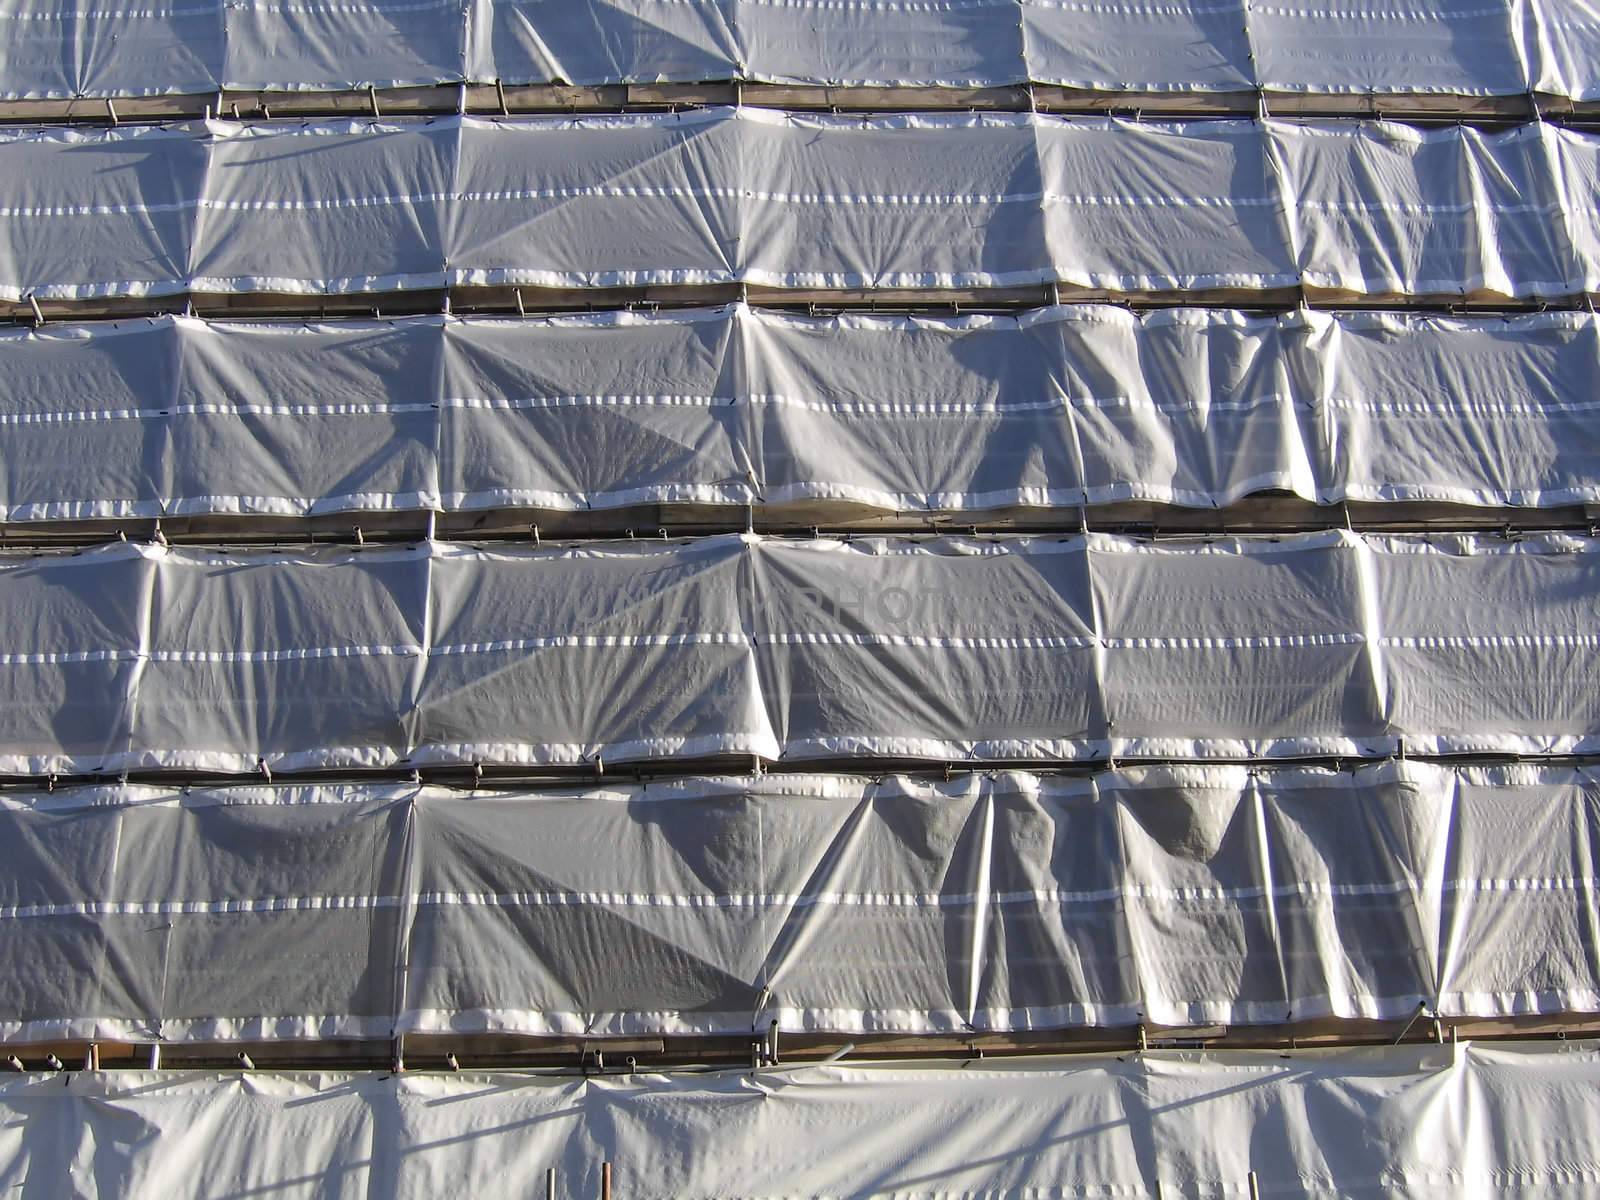 Building Covered in Tarpaulines for Renovation